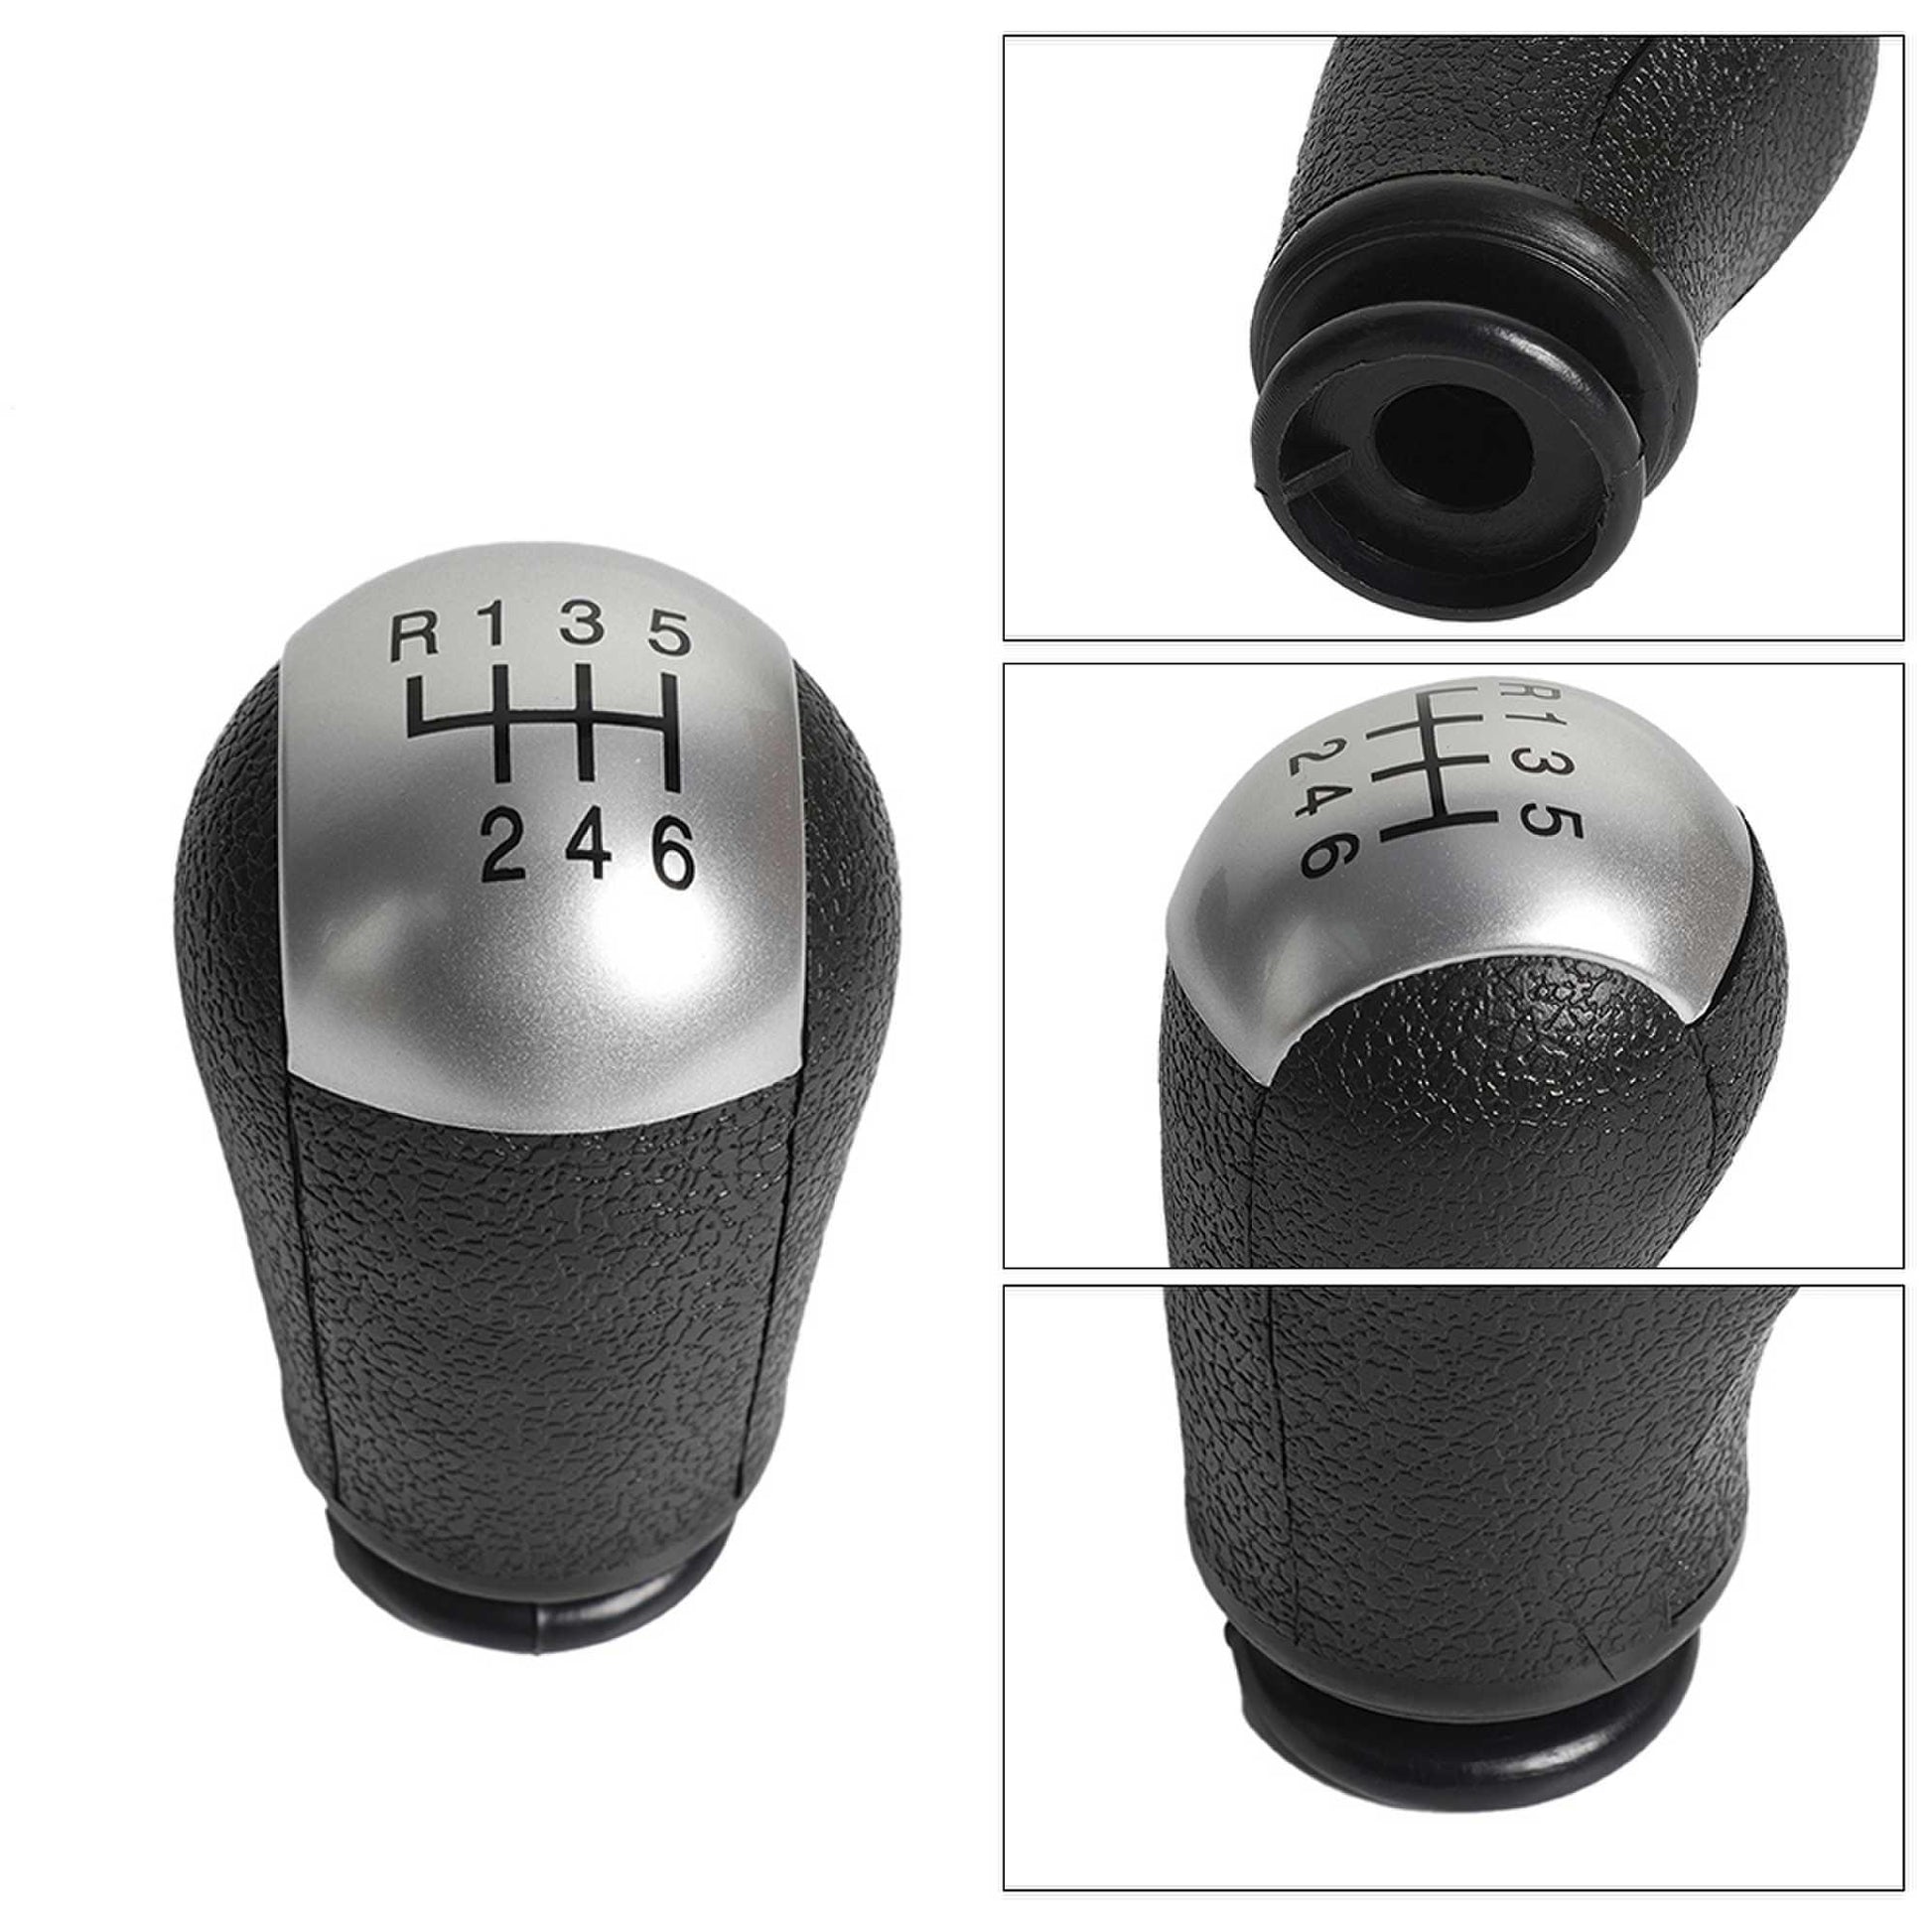 RASTP 5/6 Speed Manual Gear Shift Knob Gear Stick Head Shifter Lever Handle for Ford Focus C-Max Mustang Mondeo MK2 - RASTP